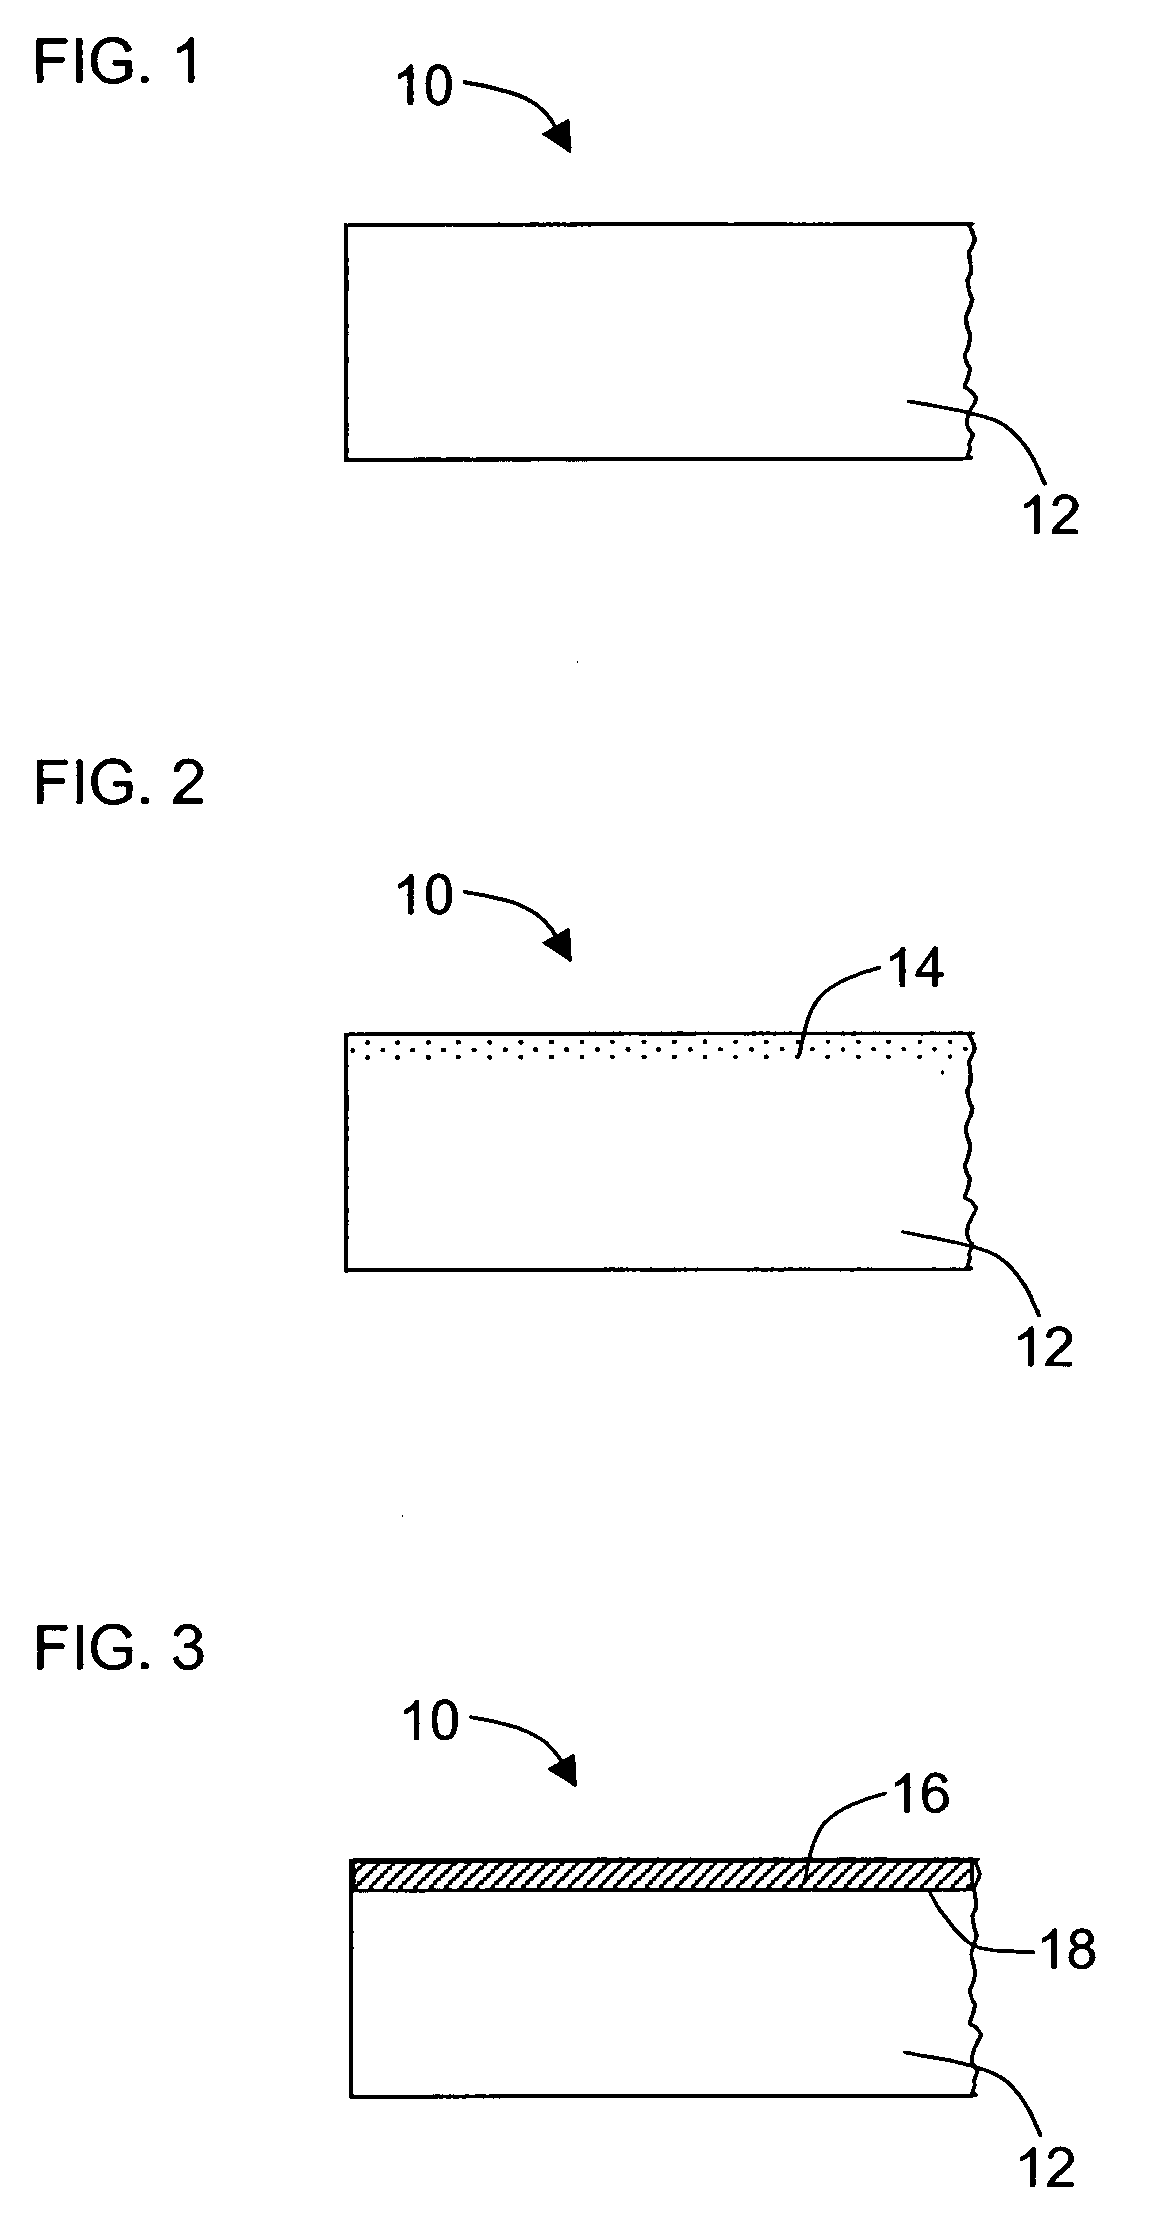 Acoustical insulator for a vehicle